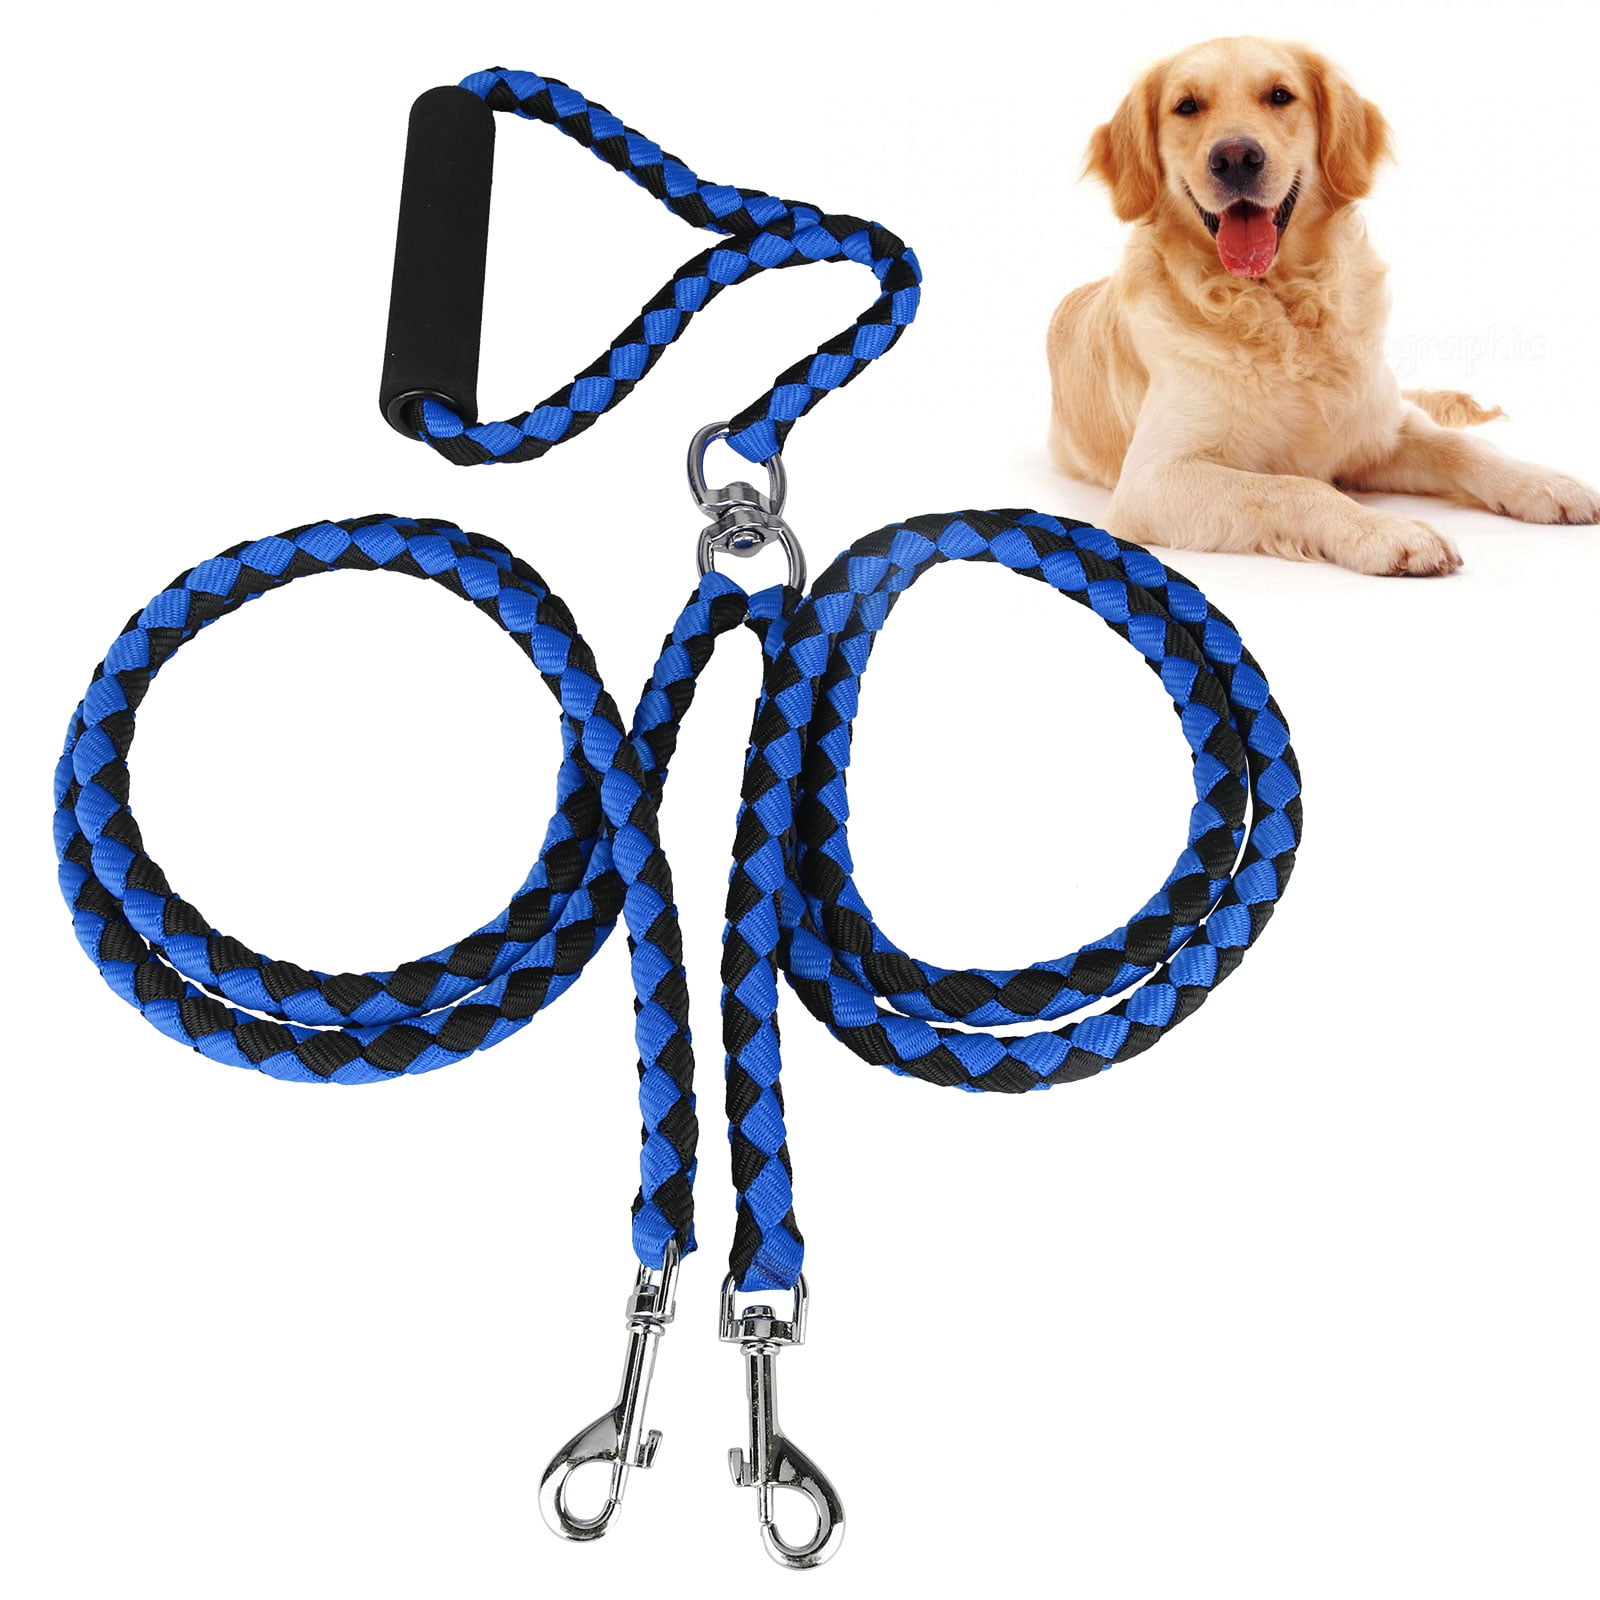 Pet Dog Leash Training Lead Elastic Heavy Duty Adjustable Leashes No Pull for Shock Absorbing Reflective Rope for Small Medium Large Dogs 